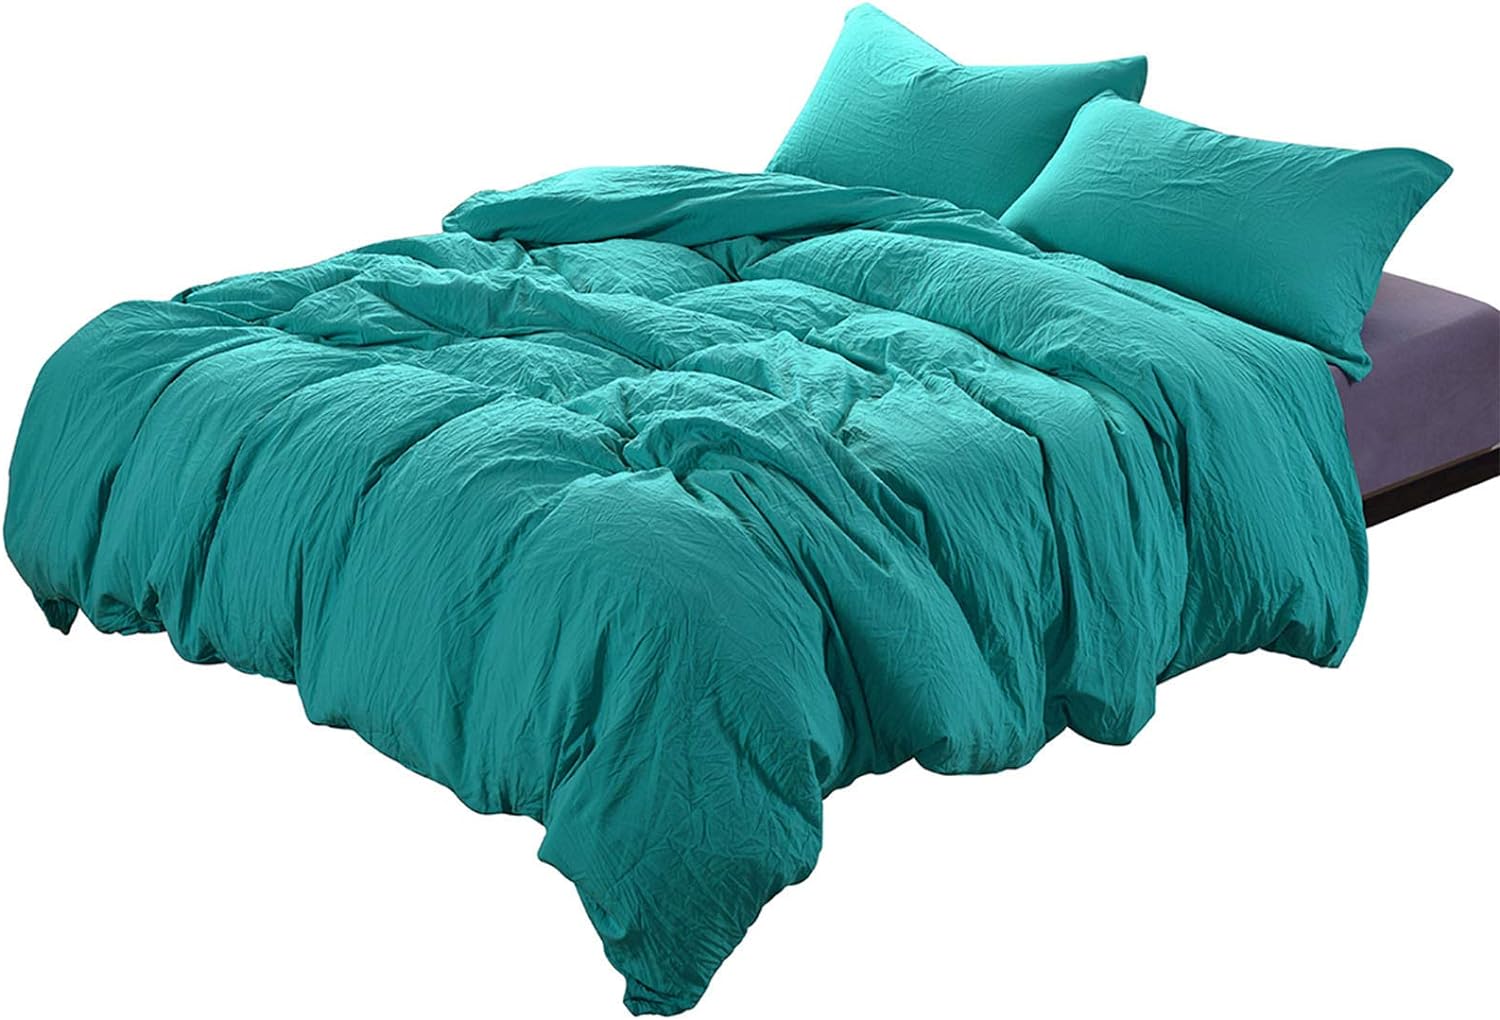 3-Piece Duvet Cover Queen, 100% Washed Microfiber Duvet Cover, Ultra-Soft Luxury & Natural Wrinkled Look, Bedding Set (Queen, Aqua)